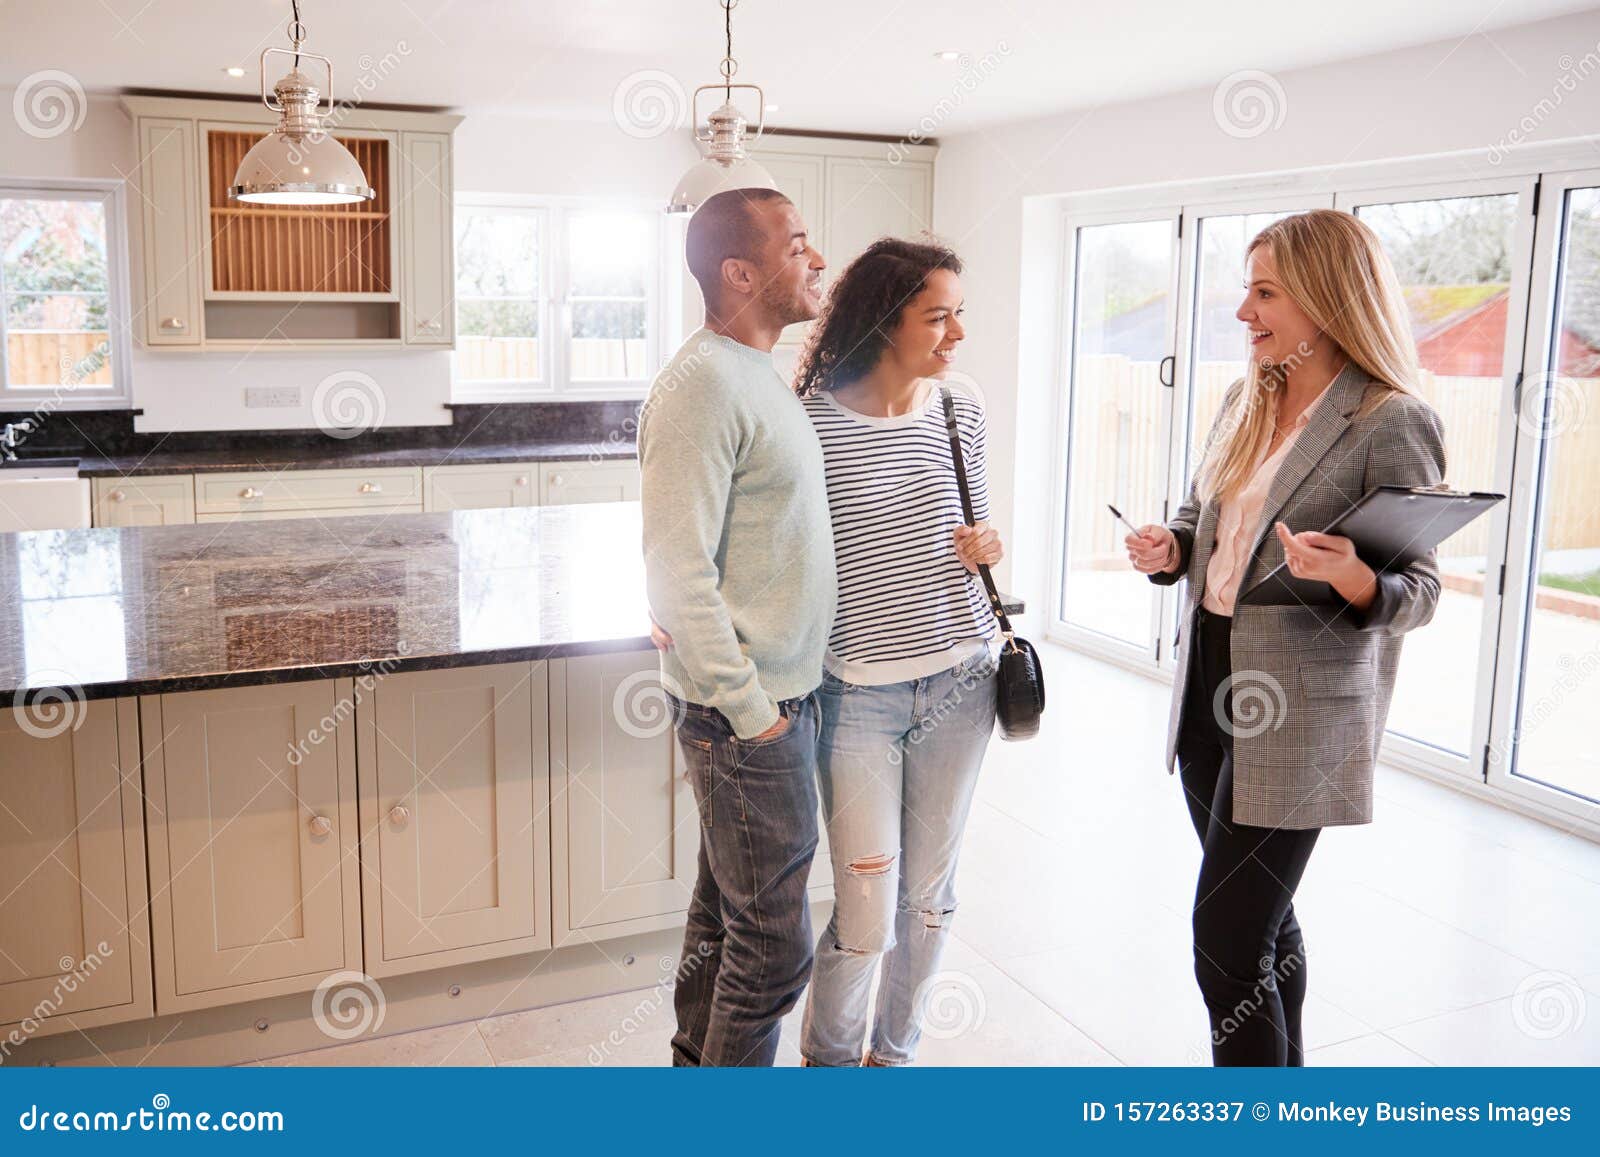 female realtor showing couple interested in buying around house